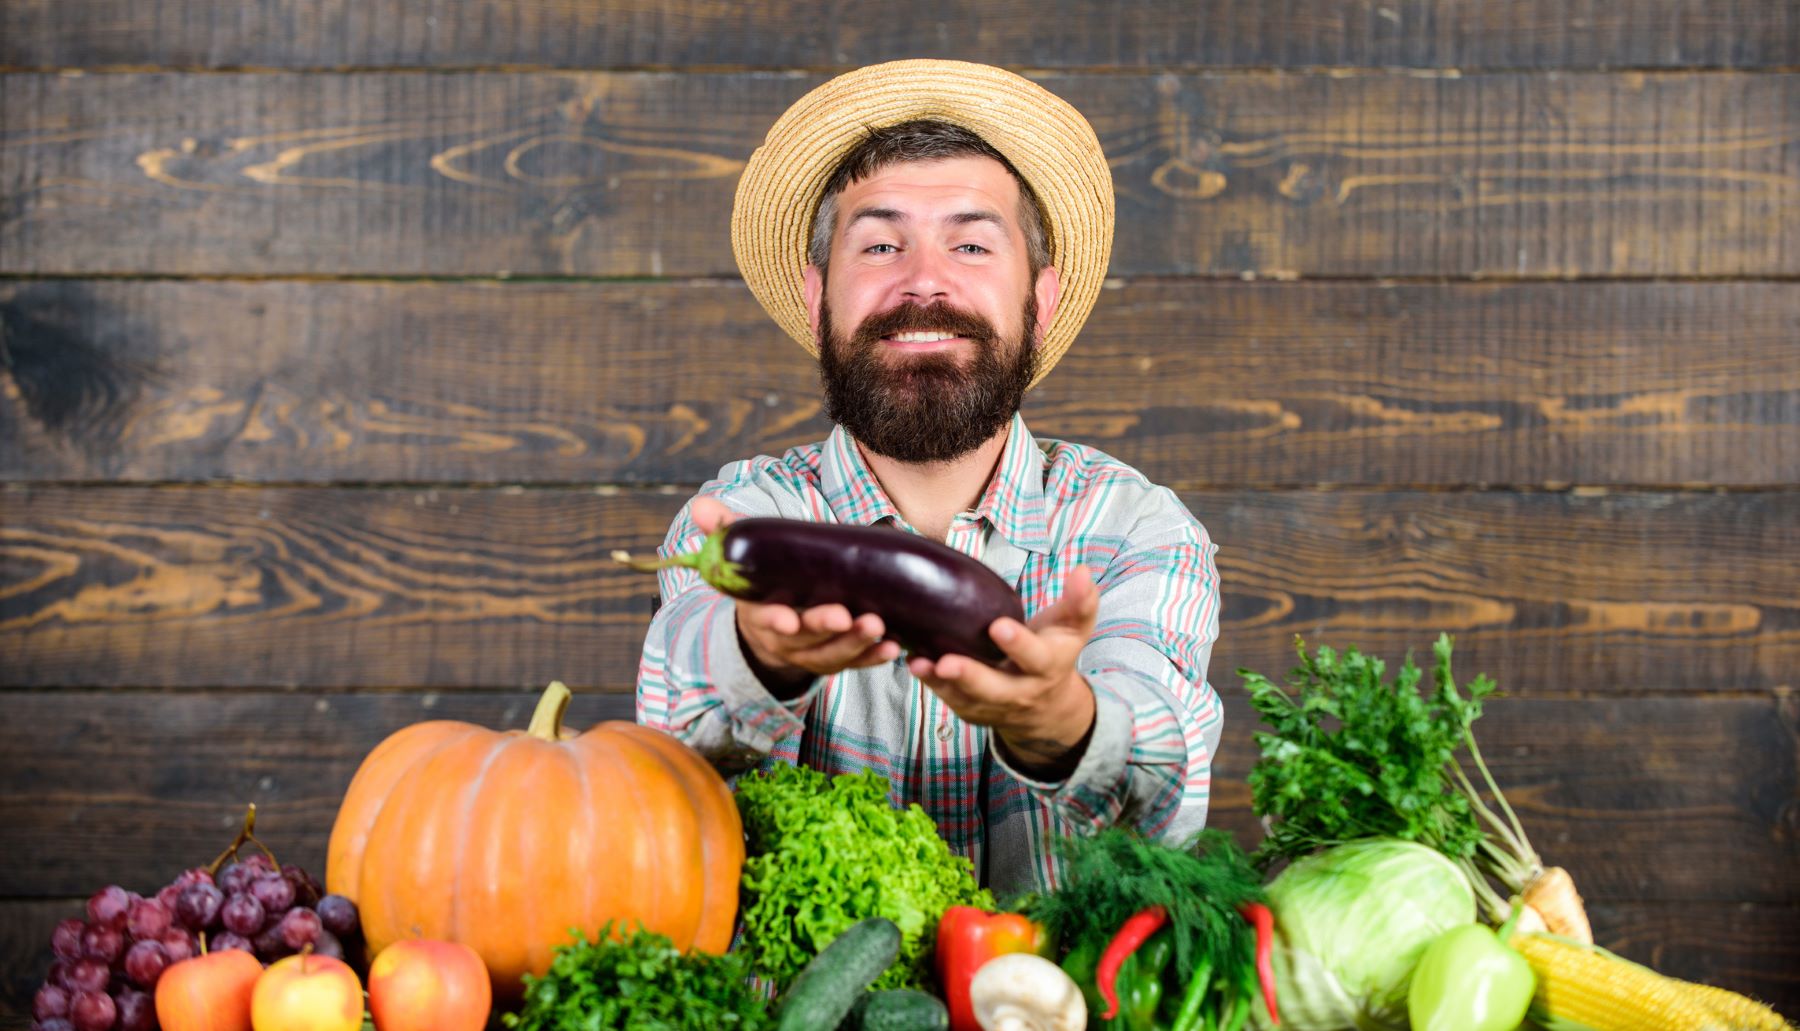 Bearded man recommending a healthy diet